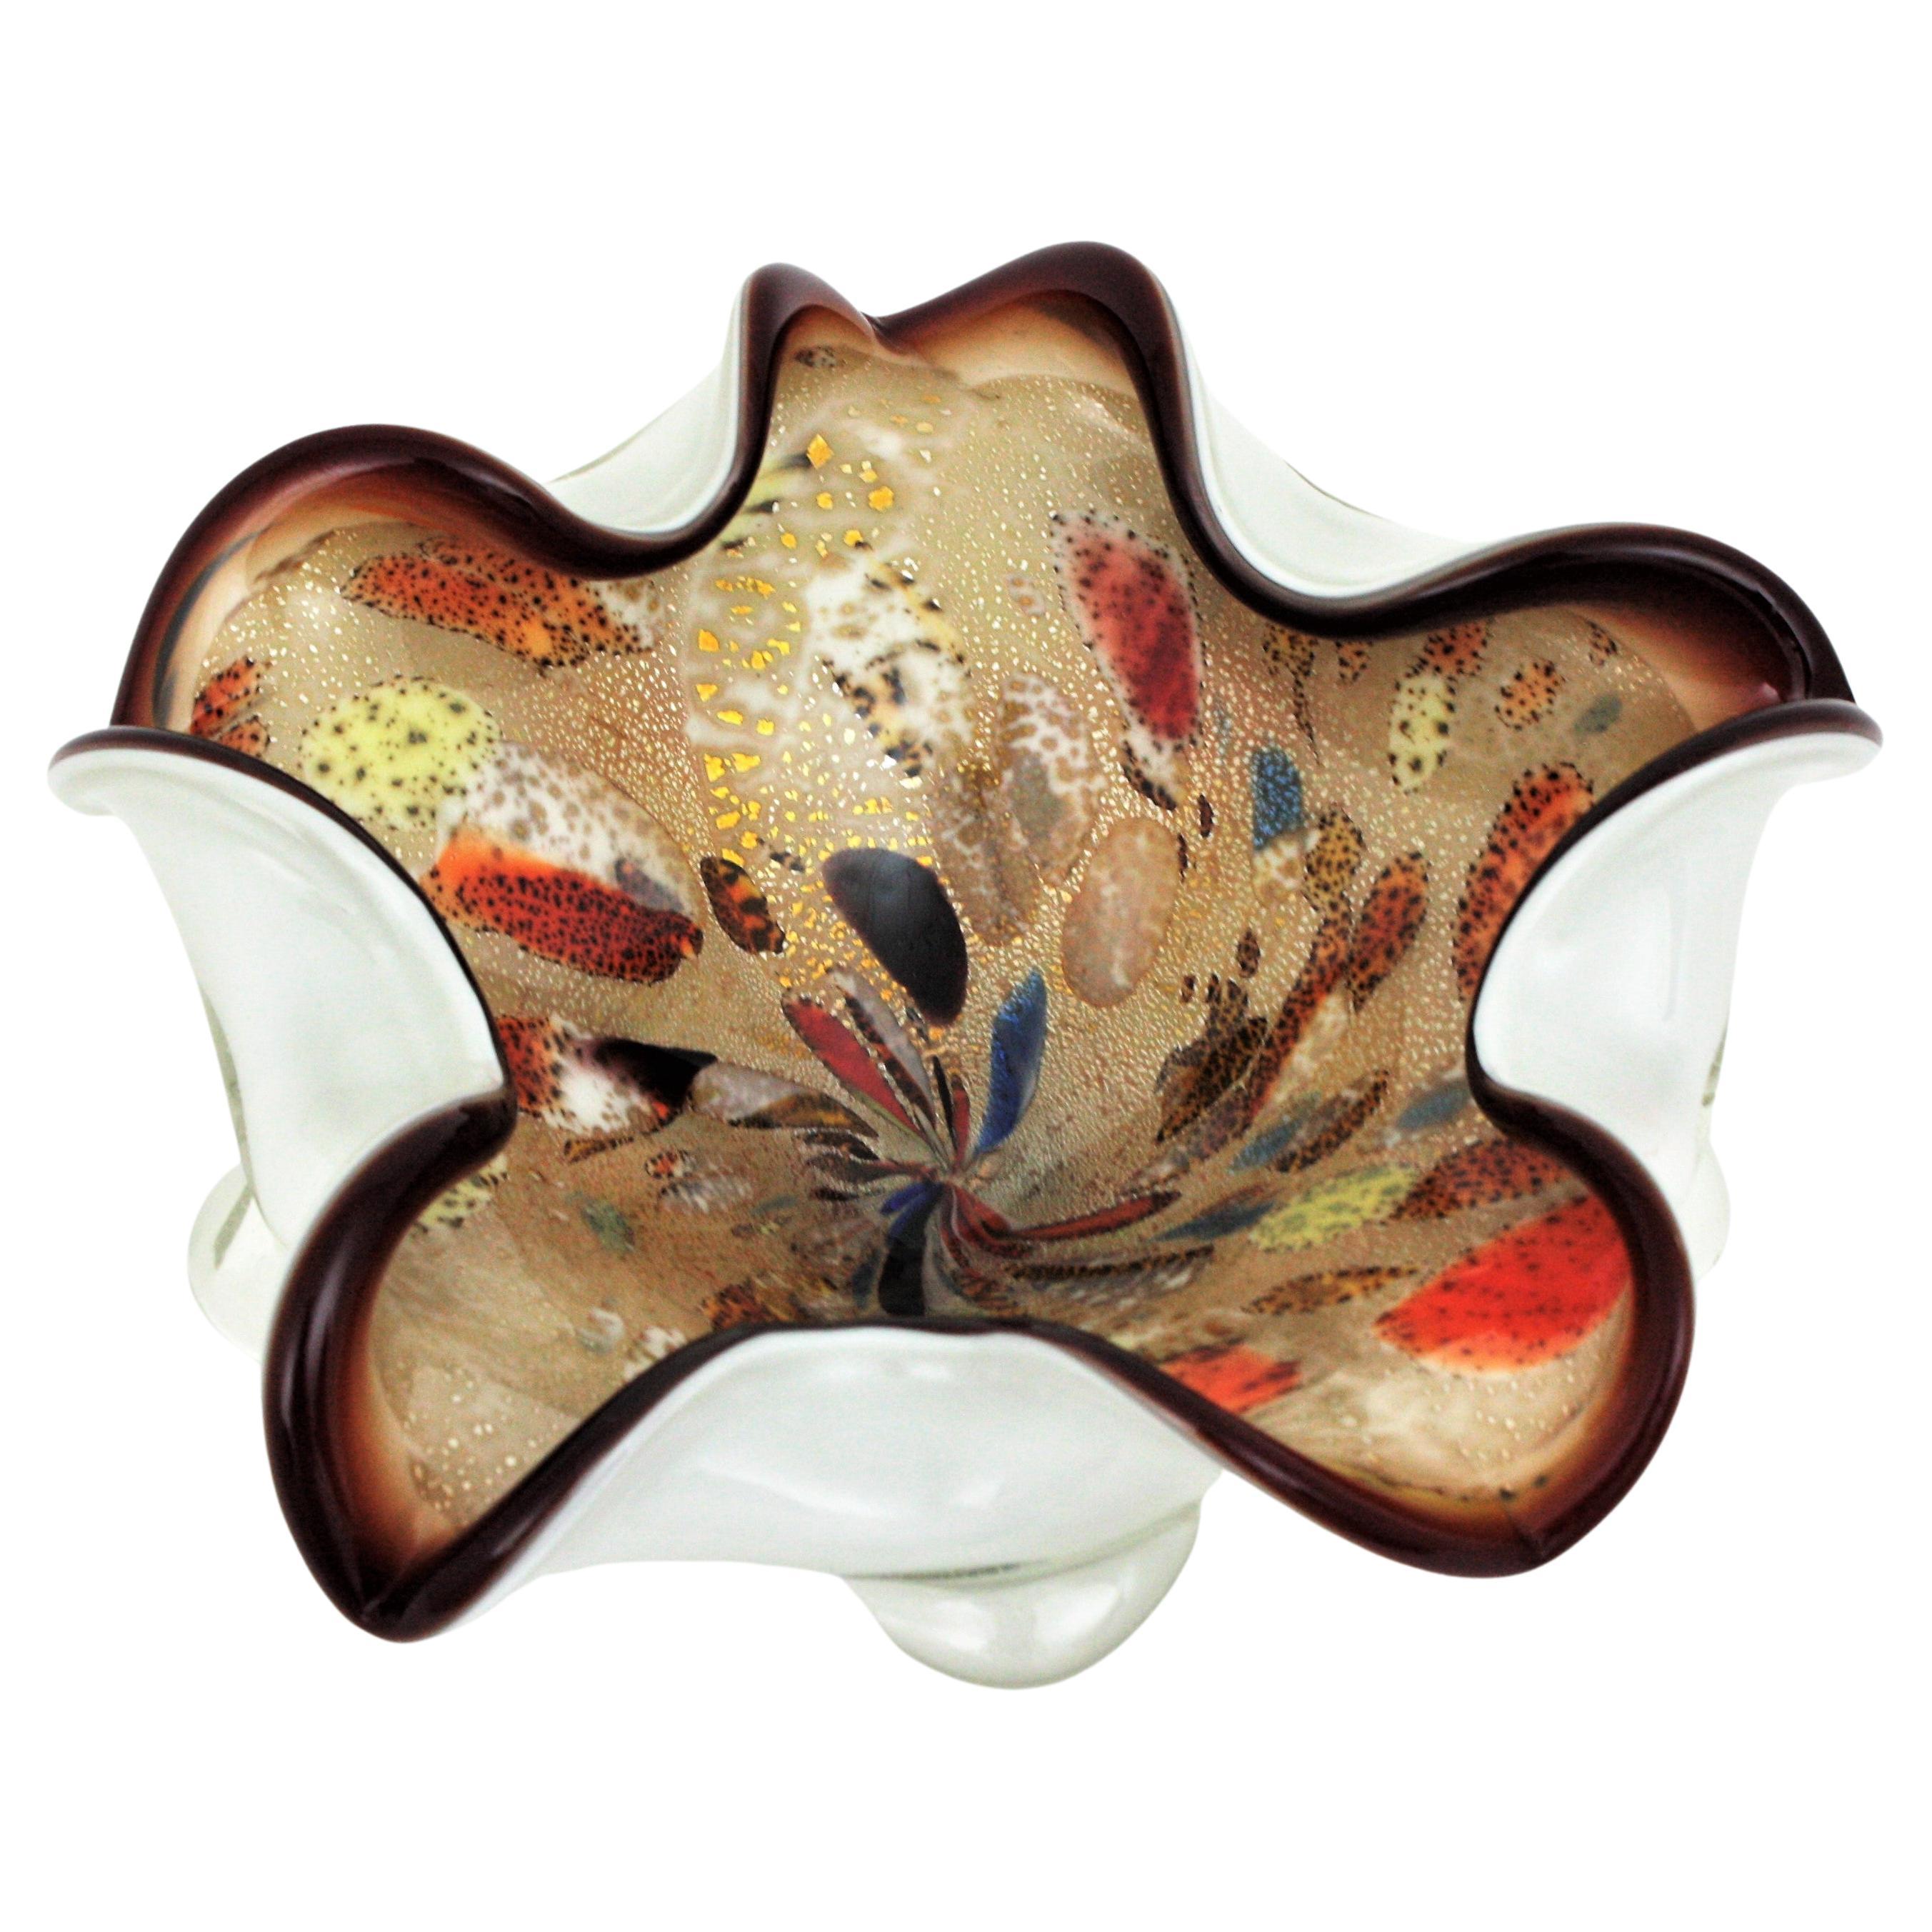 Colorful handblown Murano glass flower bowl with siver and gold flecks by Dino Martens. Italy, 1960s
This eye-catching large bowl is full of details. The interior part in shades of brown is accented by multicolor murrine details and aventurine